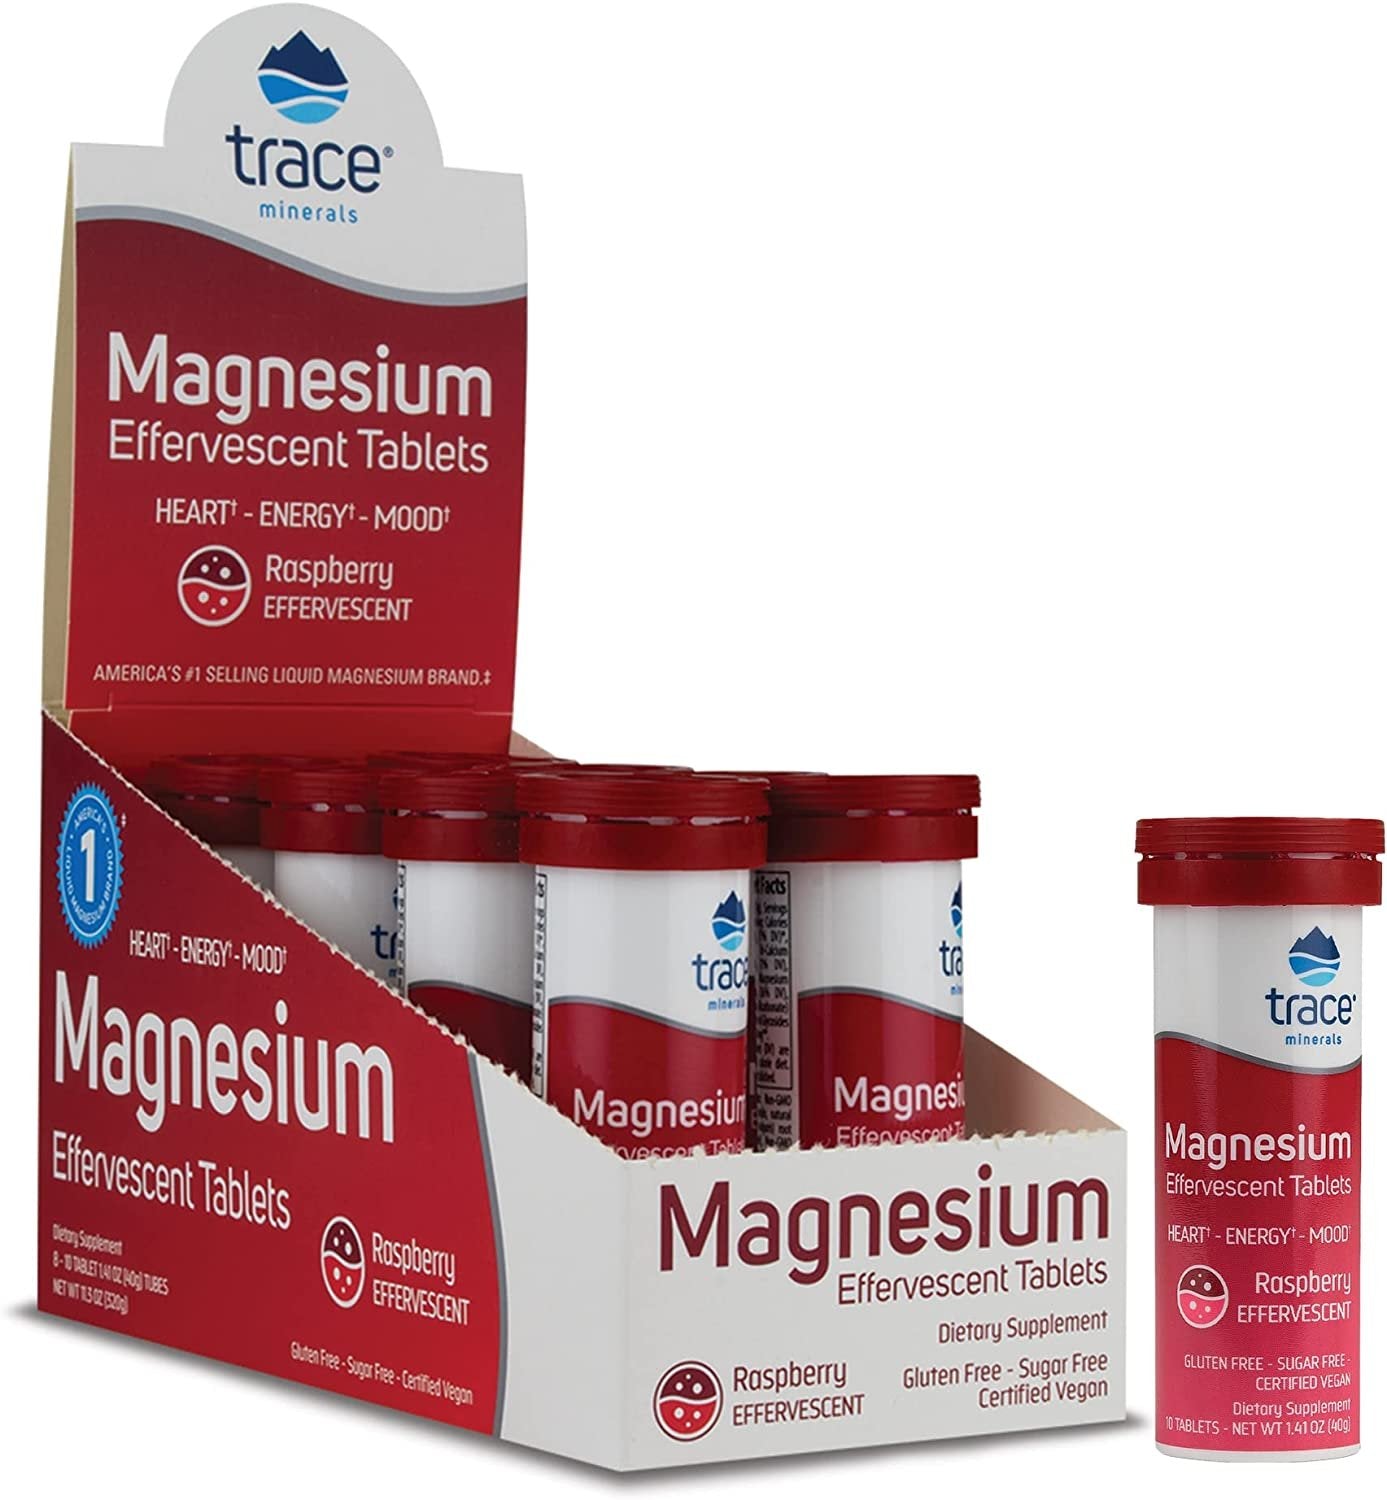 Trace Minerals | Magnesium Effervescent Drink Tablets | Promotes Heart Health, Mood, pH Balance and Energy | Raspberry Flavor | 150mg per serving, 80 Tablets